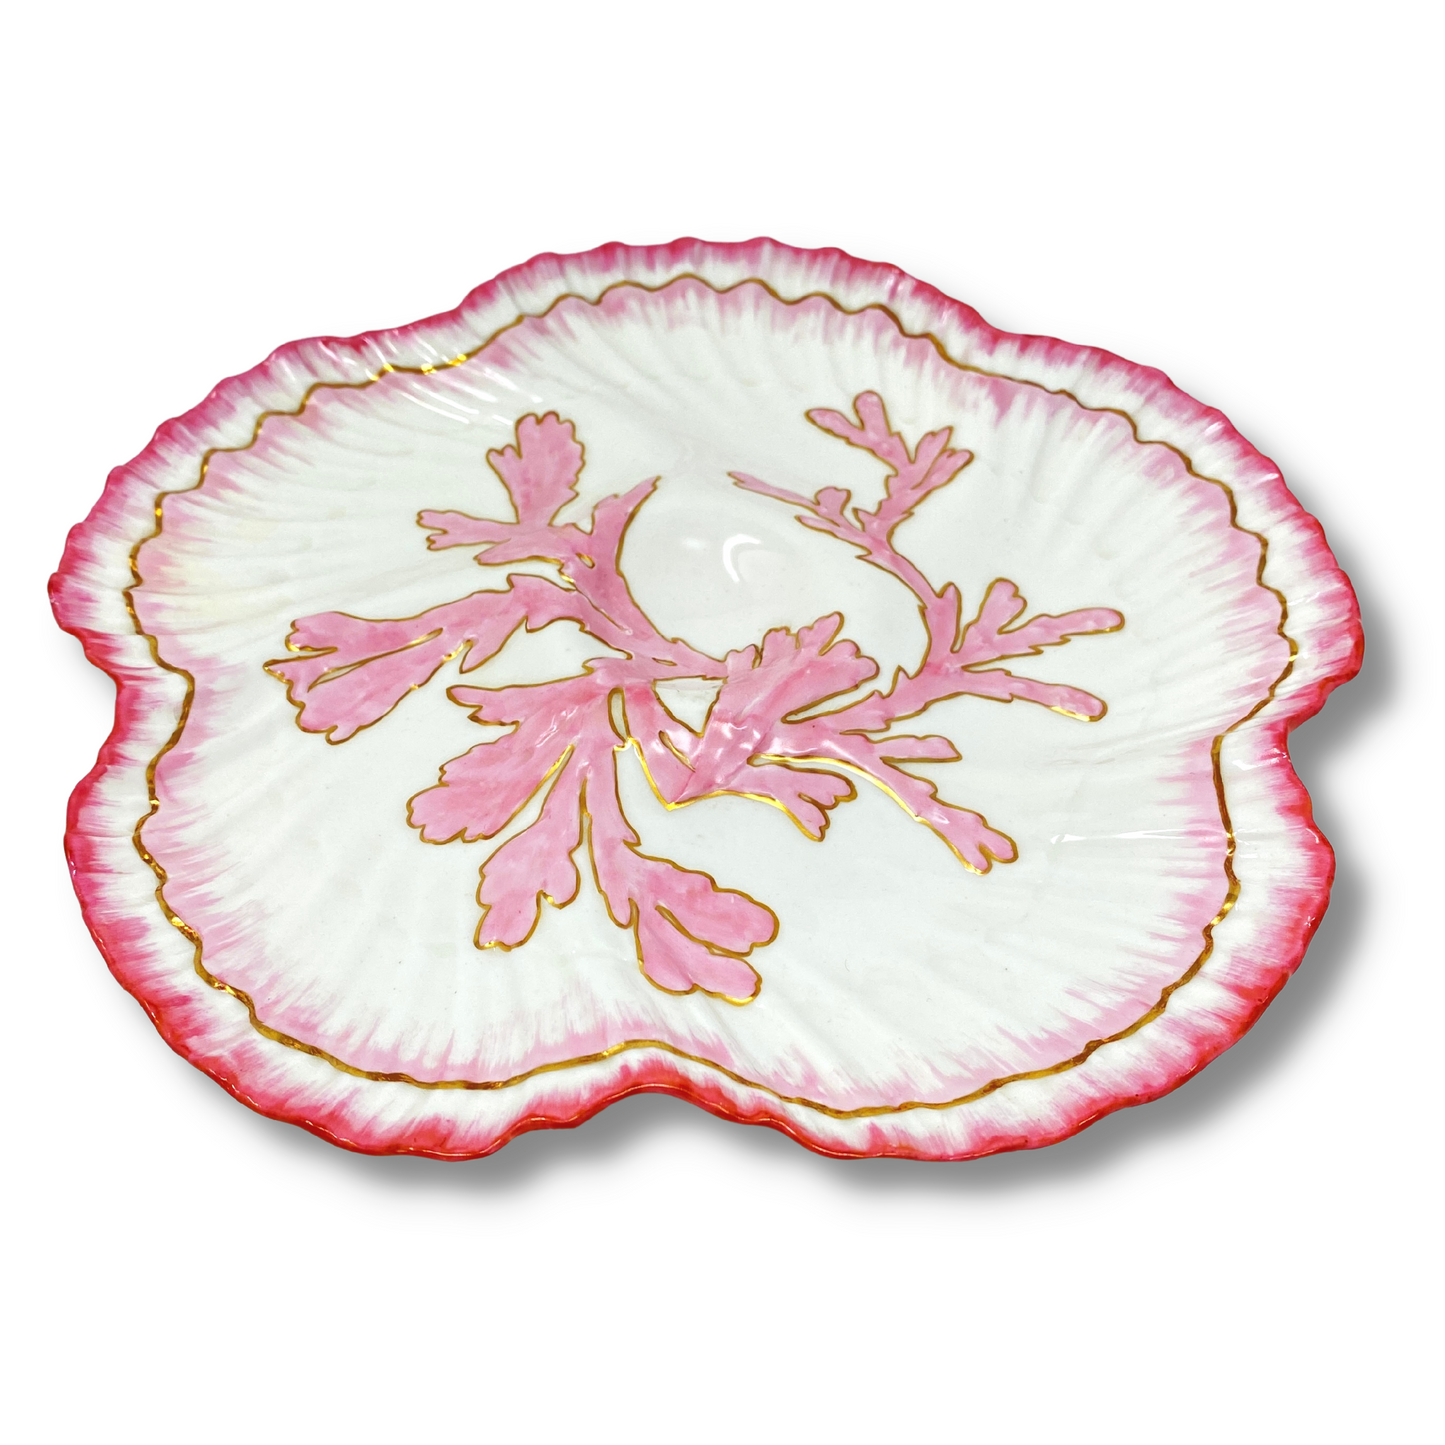 Tiffany & Co. 1883 New York Brownfields China Pink Oyster Plate